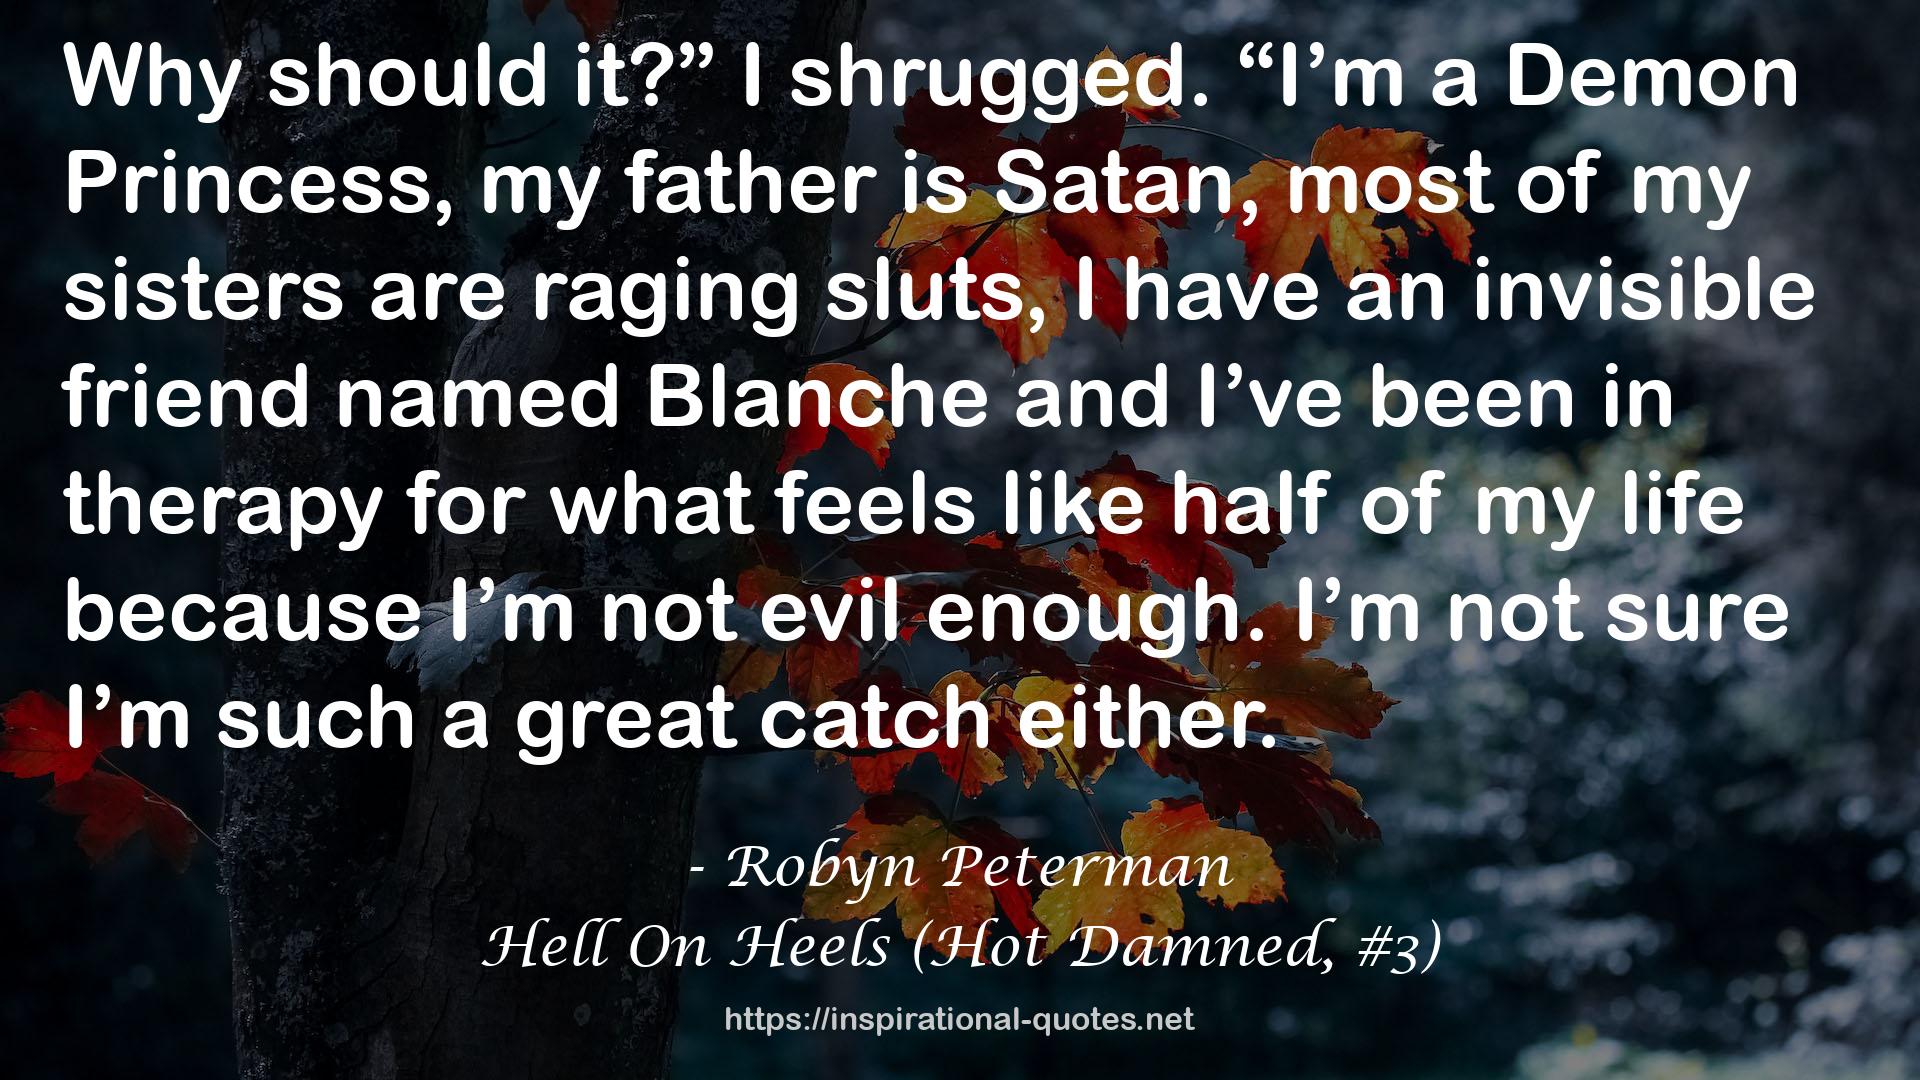 Hell On Heels (Hot Damned, #3) QUOTES